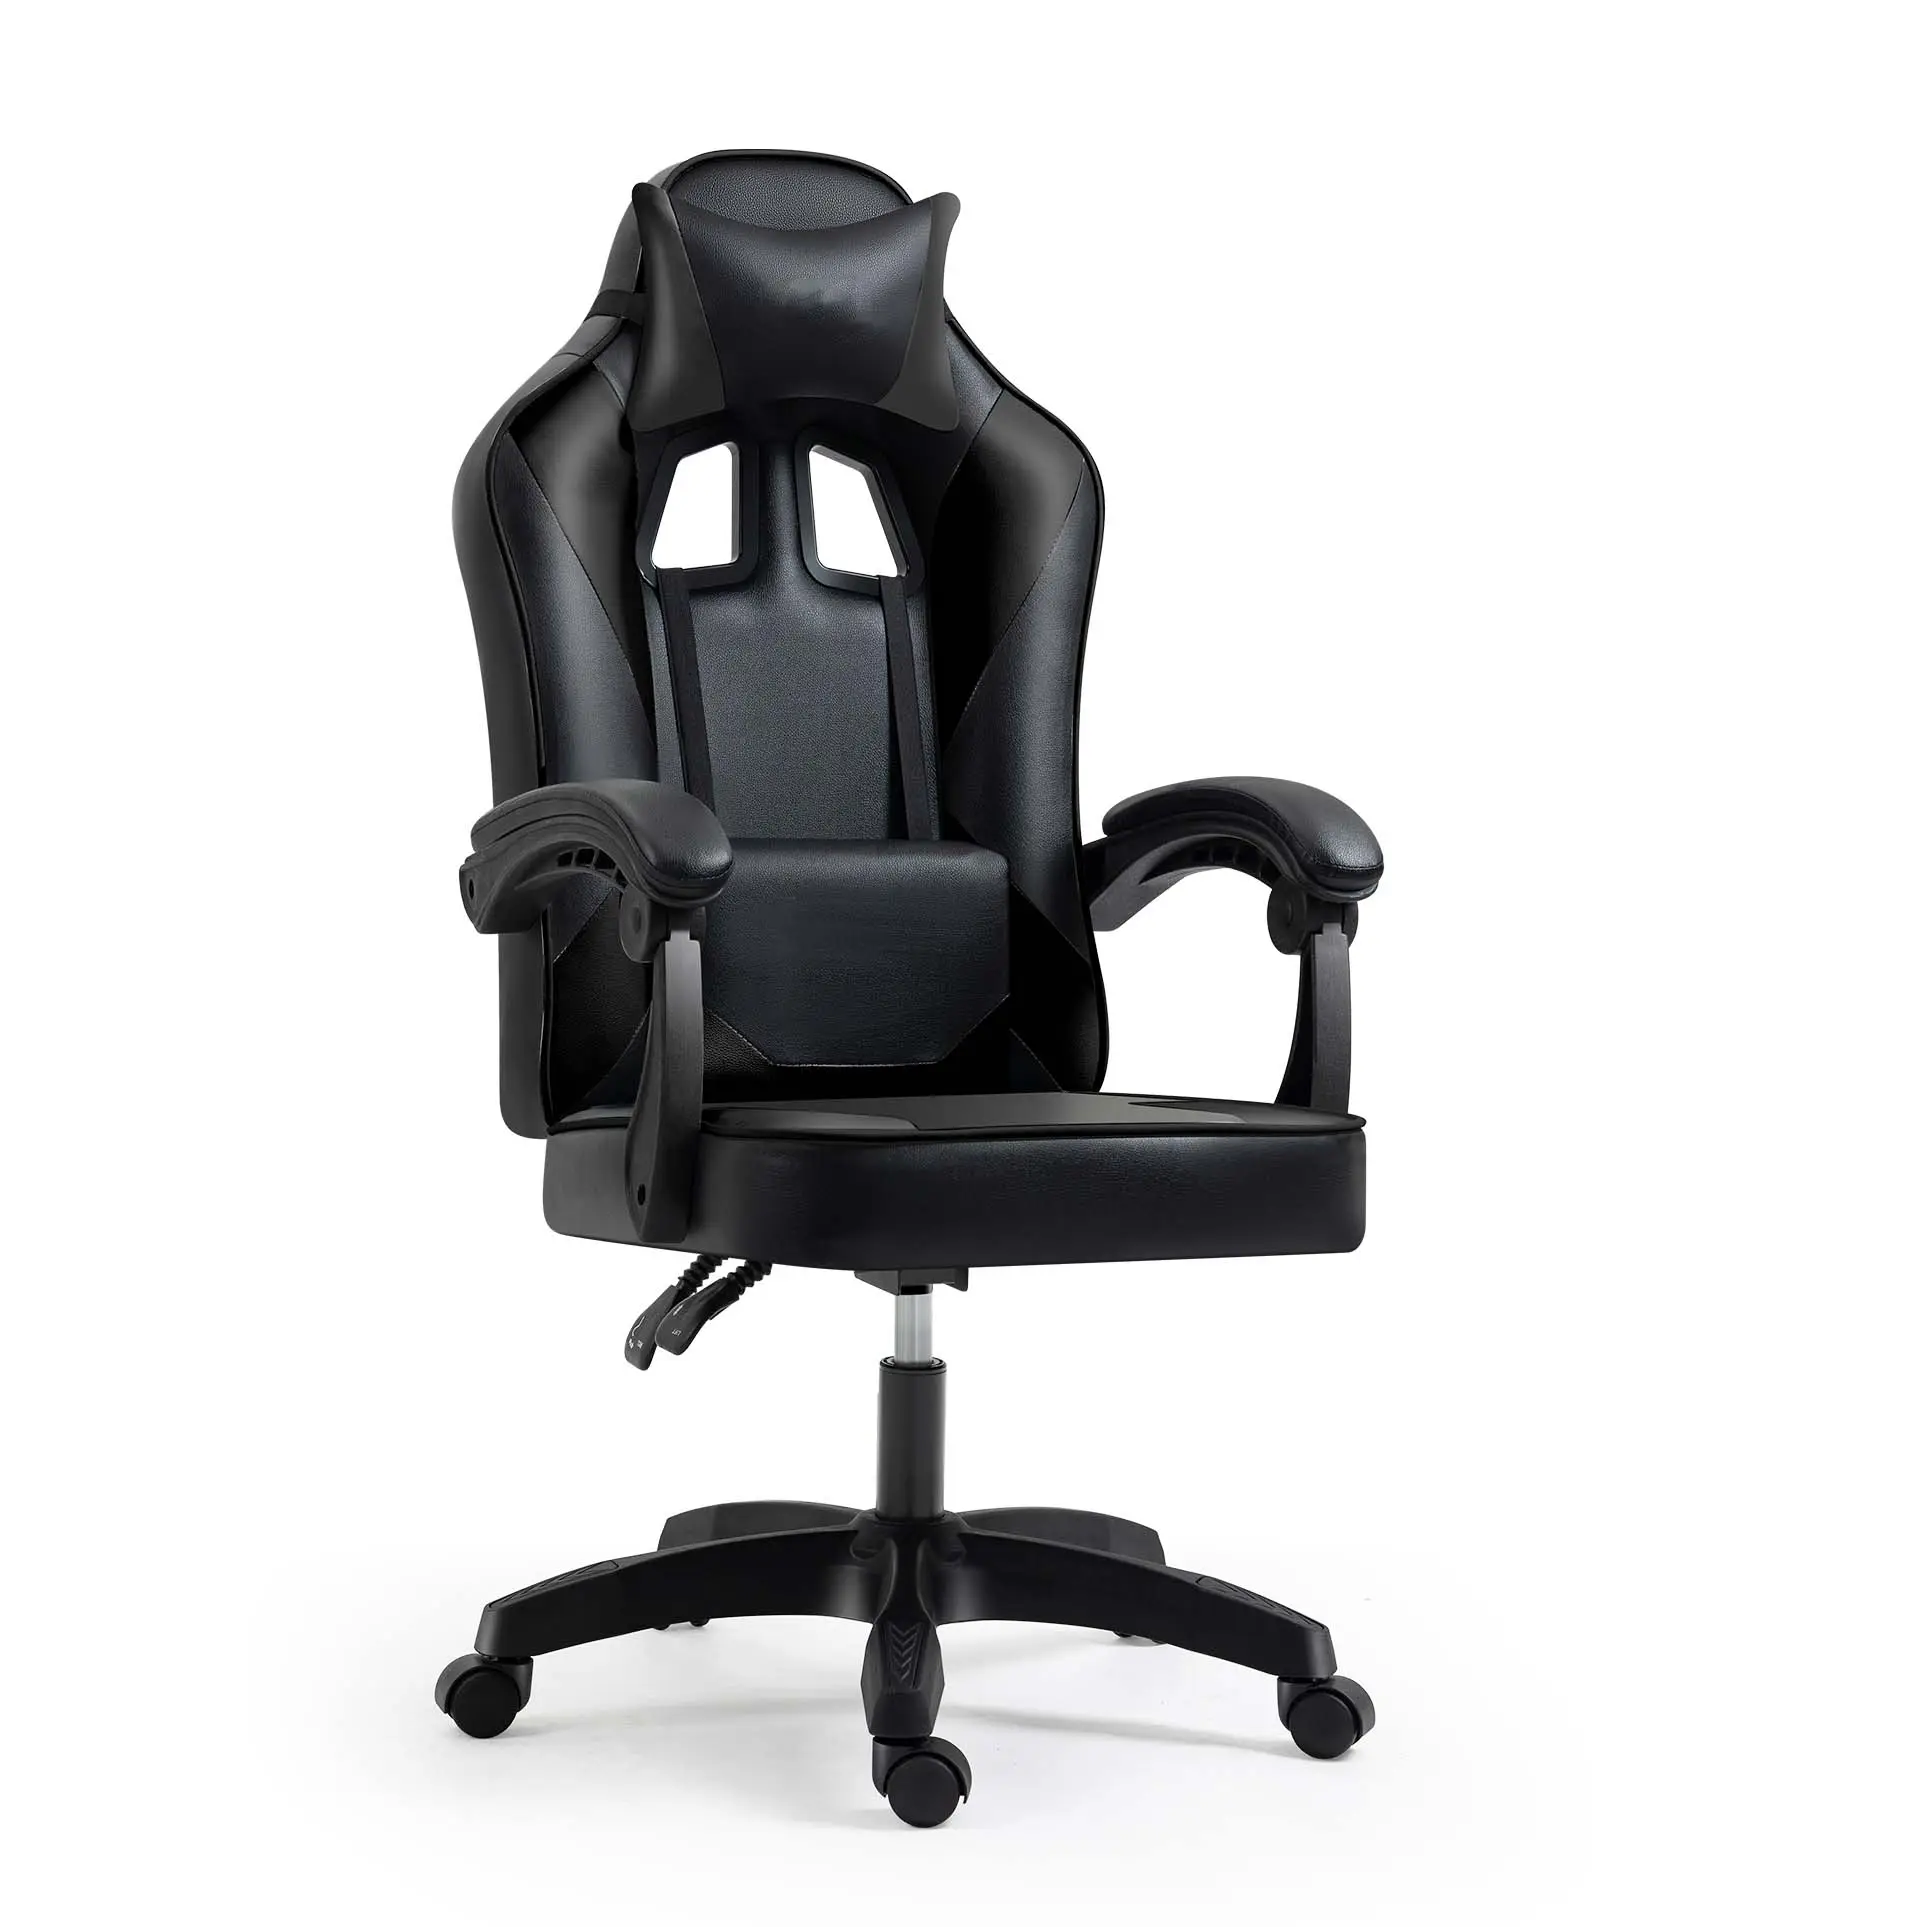 always unbeatable prices Ergonomic office gaming chair,High Back Comfortable Office Chair Gaming Chair, Fashionable Competition